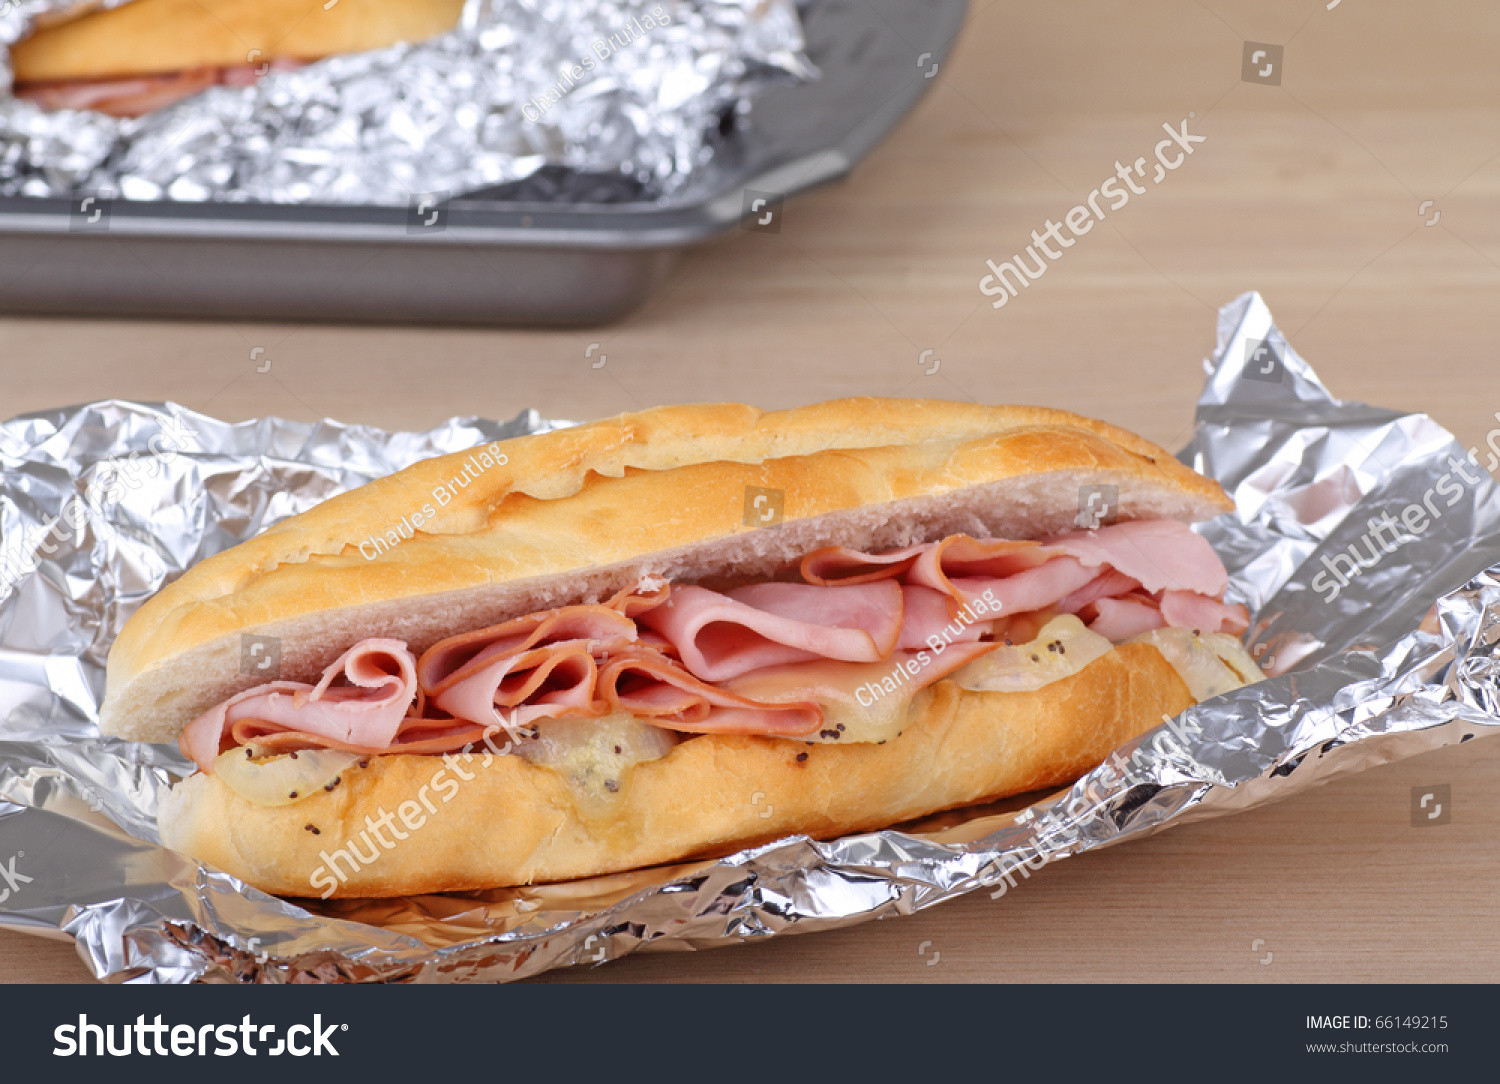 Baked Ham And Cheese Sandwiches In Foil
 Ham And Cheese Sandwich Wrapped In Aluminum Foil Stock